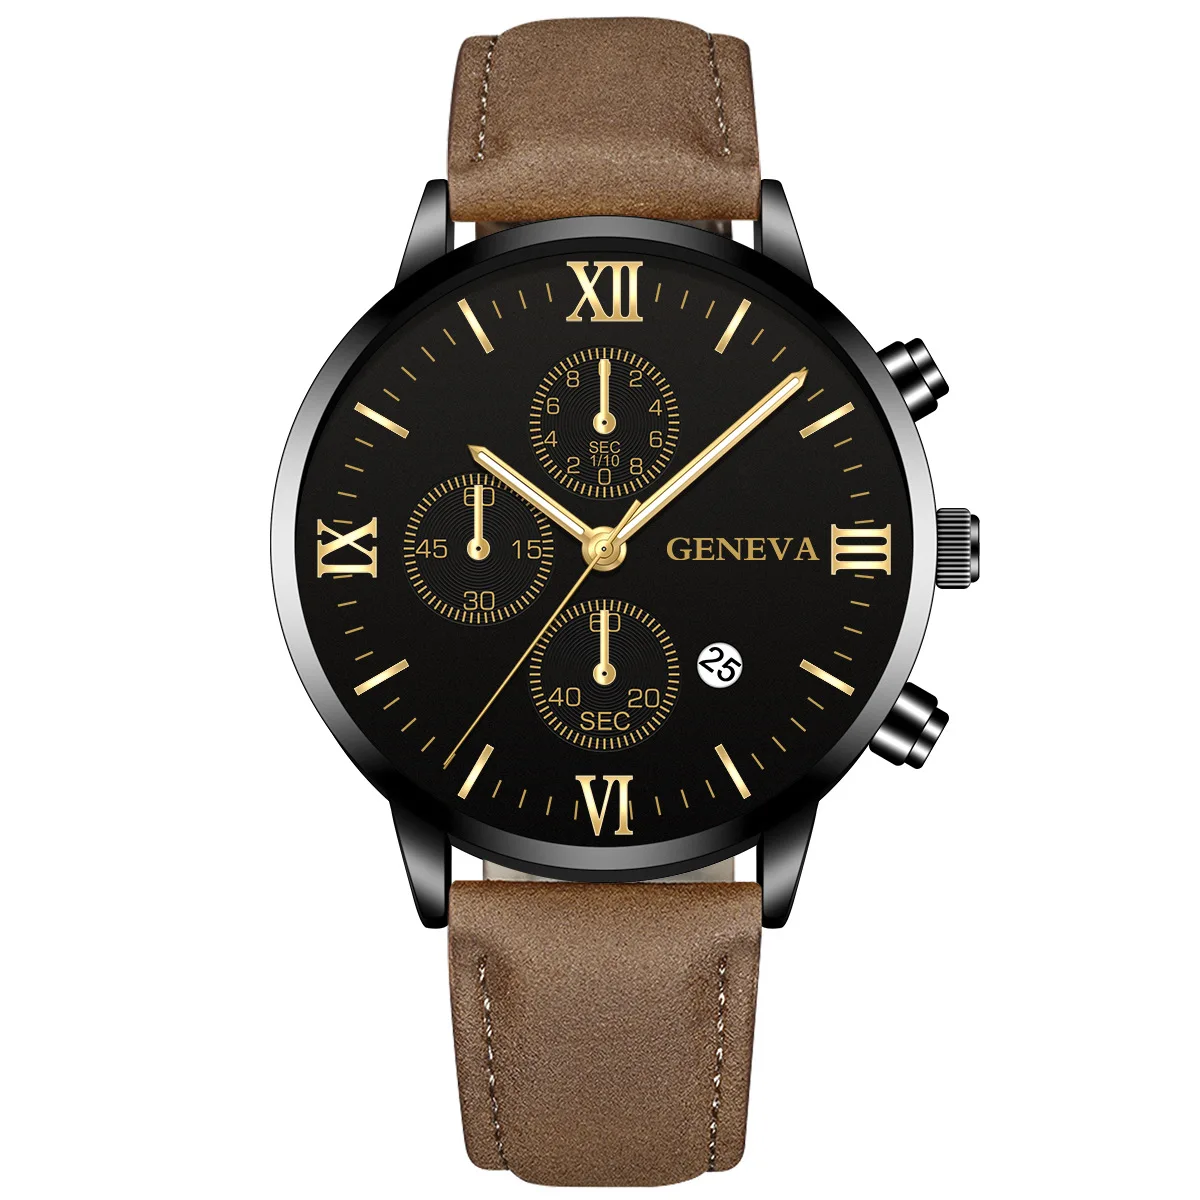 

4303 GENEVA Business Men Watch Leather Analog Quartz Wristwatch With Calendar Mens Watches Top Brand Luxury Clock, 32 different colors as picture